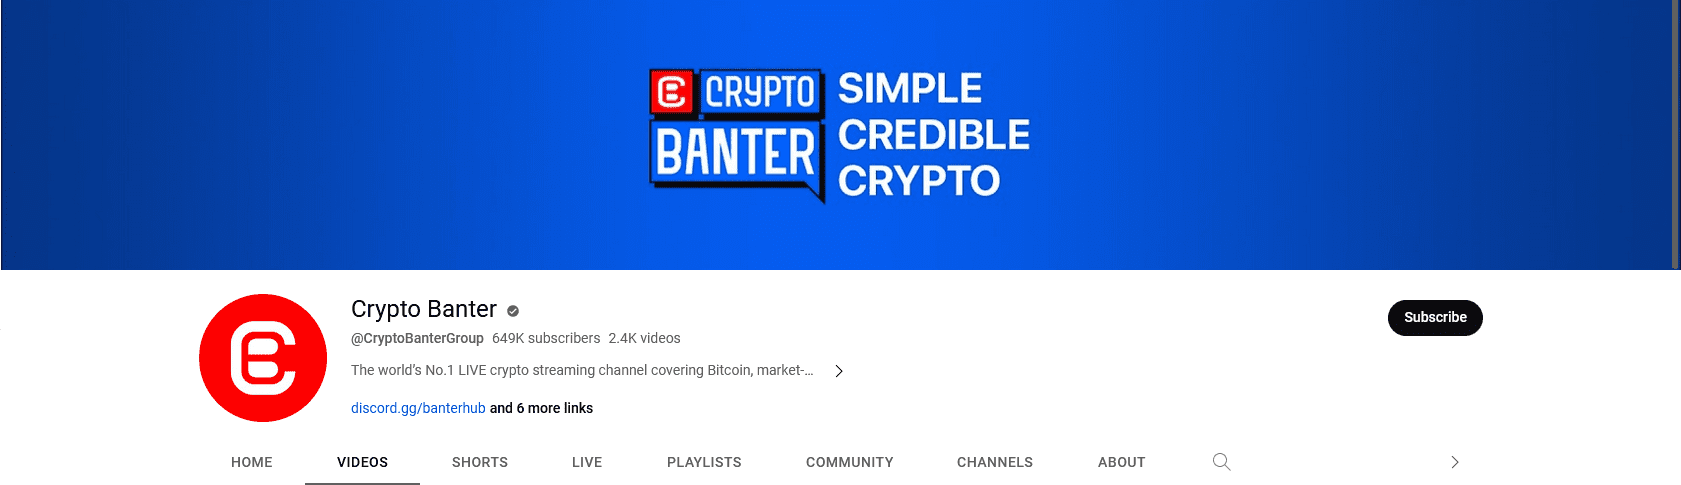 Crypto Banter Youtube Channel